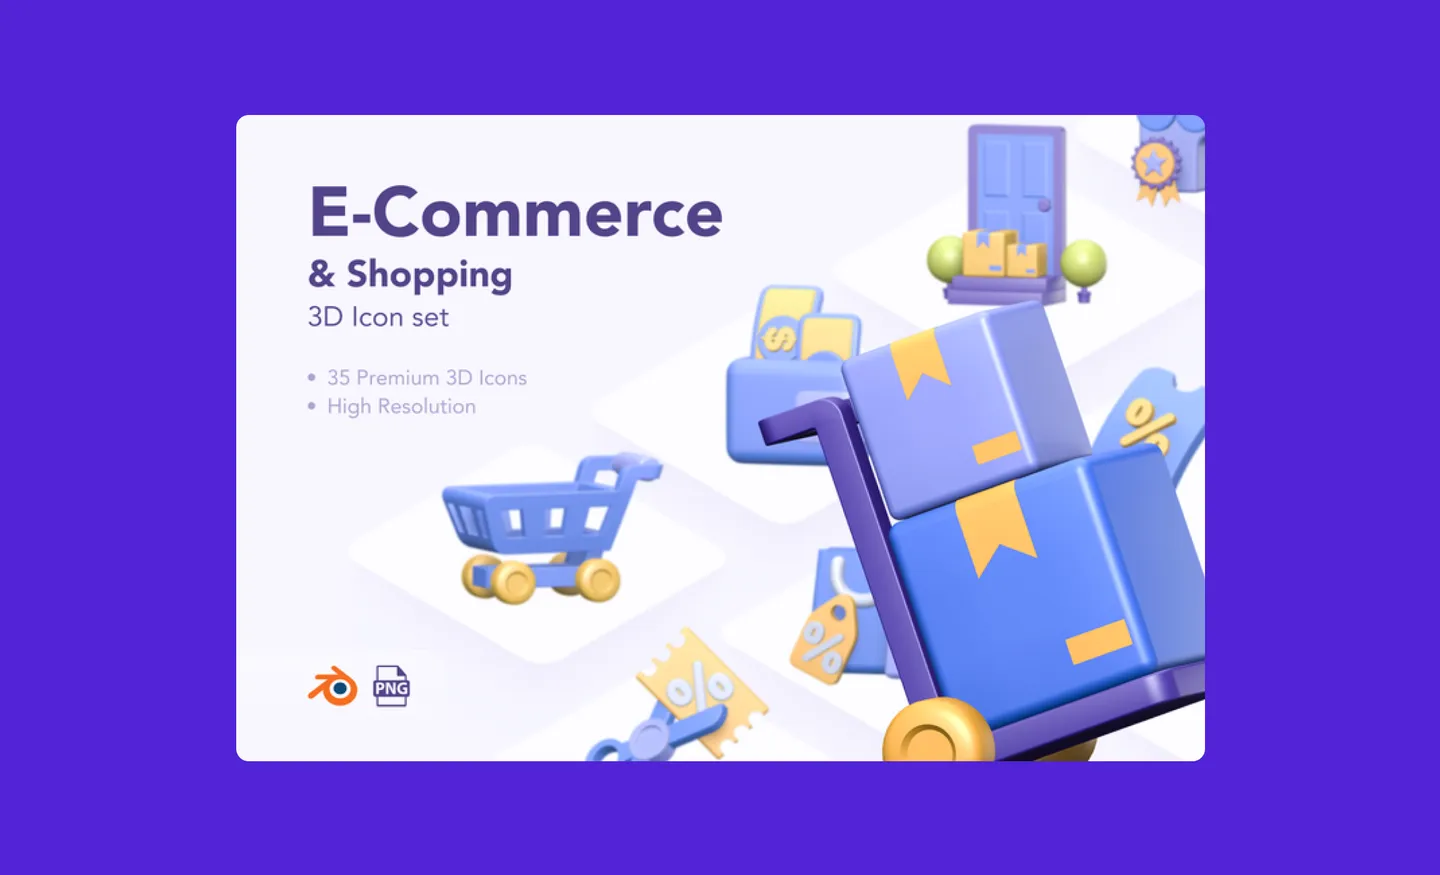 E-Commerce and shopping 3D icon set